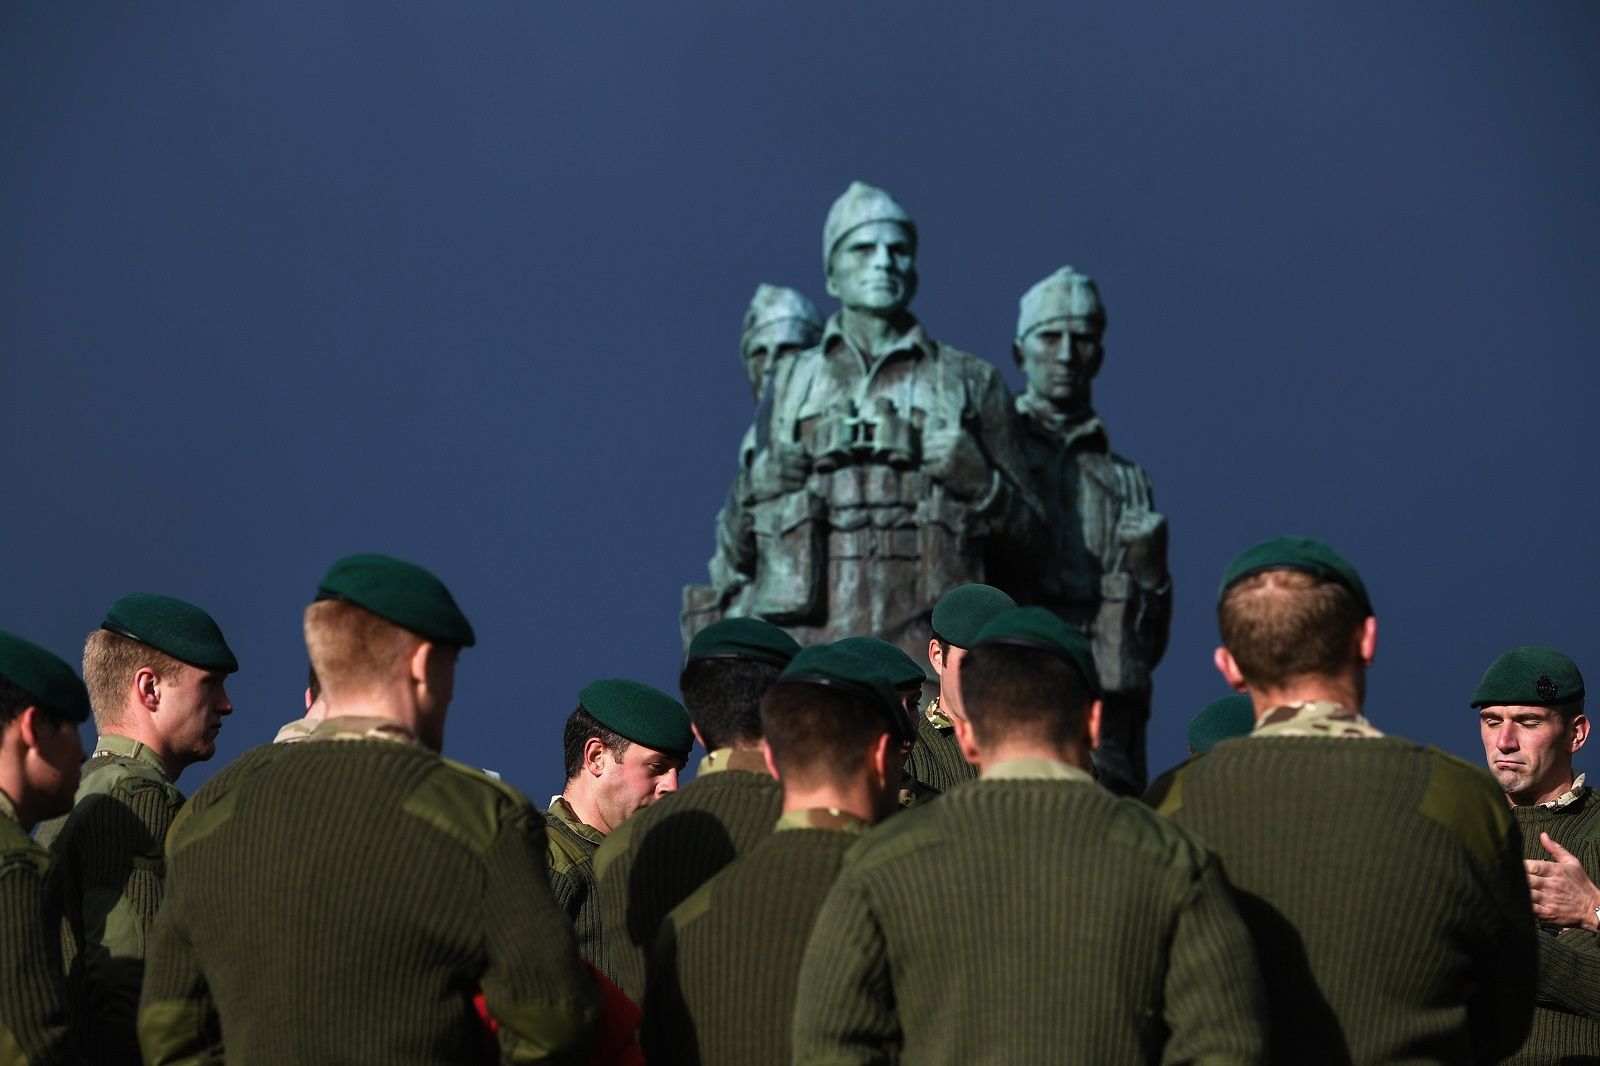 SPEAN BRIDGE, UNITED KINGDOM - NOVEMBER 11:  Serving servicemen and veterans gather at Commando Memorial, Spean Bridge where they observed a two minute silence as a mark of respect for the war dead on November 11, 2017 in Spean Bridge, Scotland. Armistice Day traditionally marks the end of the WWI when Germany and the allied forces signed the armistice signaling the end of hostilities on the Western Front. The cessation of the war officially took effect on the eleventh hour of the eleventh day of the eleventh month and is marked annually by services of remembrance for all those who have fallen in wars and a two minute silence.  (Photo by Jeff J Mitchell/Getty Images)